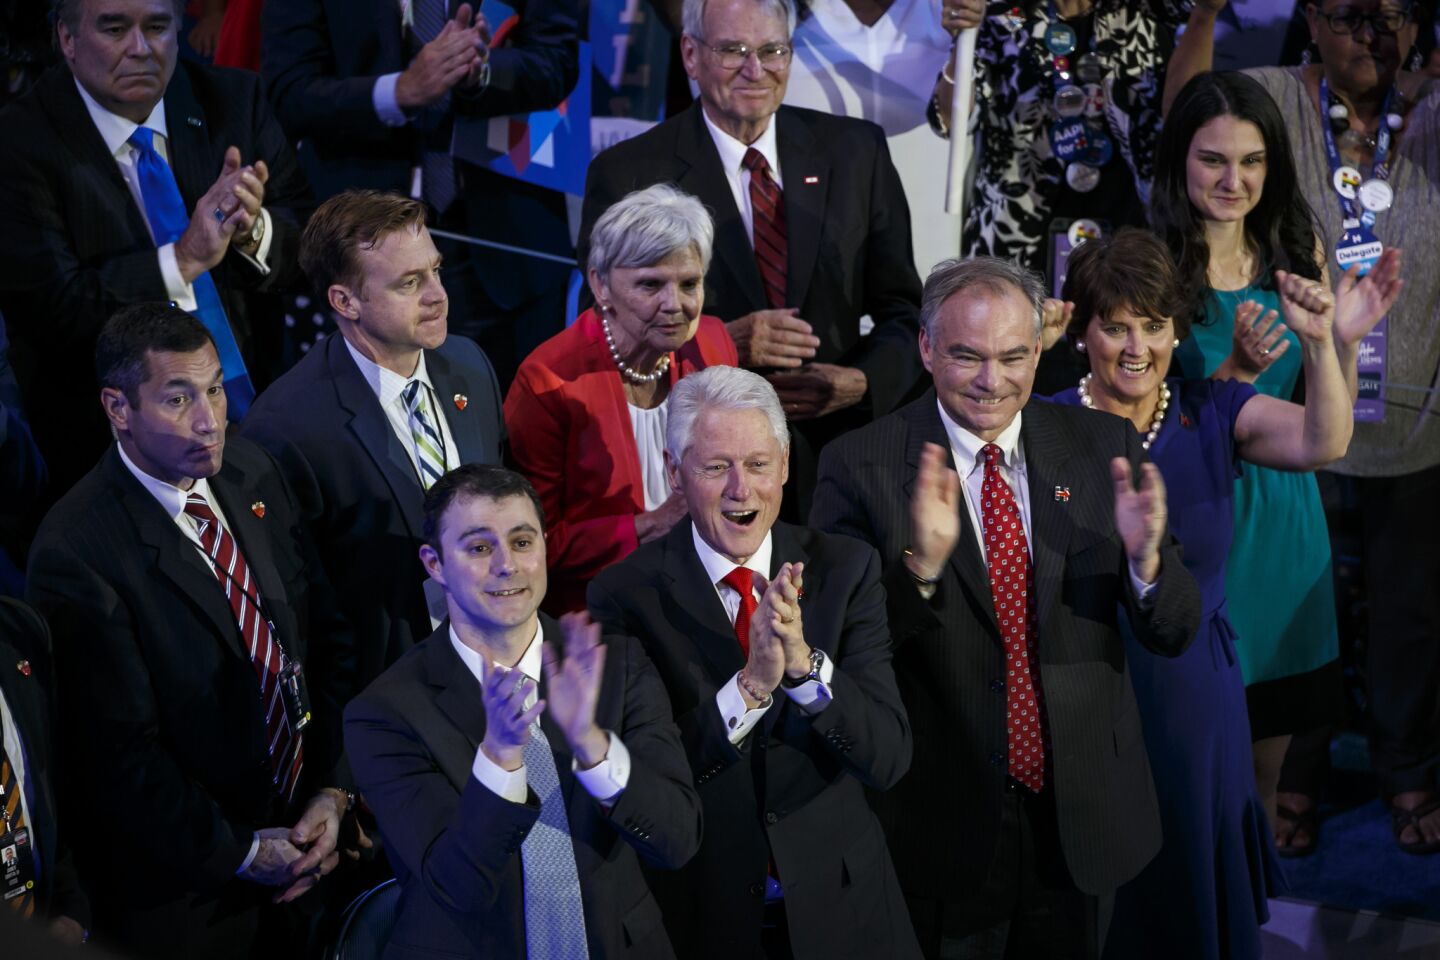 Marc Mezvinsky, from left, President Bill Clinton, Senator Tim Kaine, and Anne Holton watch a video about Hillary Clinton at the 2016 Democratic National Convention.